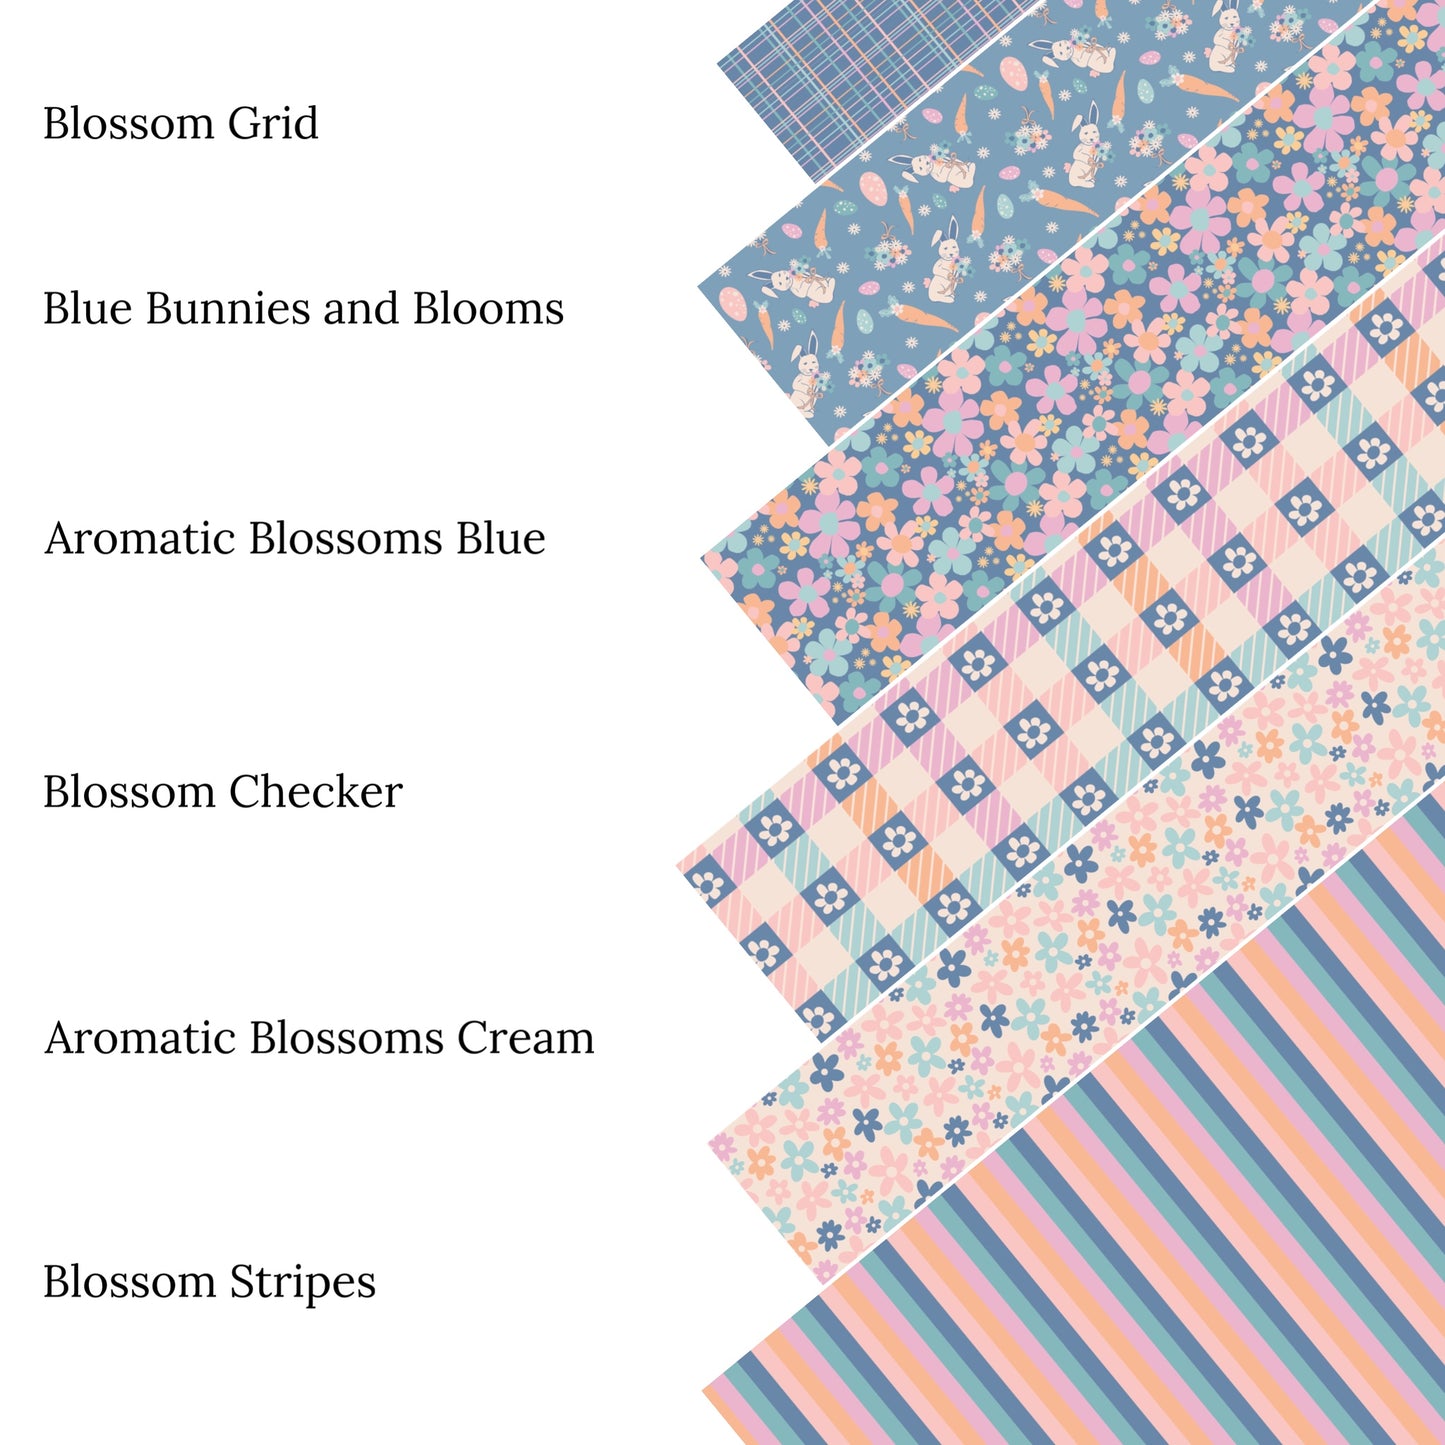 Aromatic Blossoms Blue Faux Leather Sheets